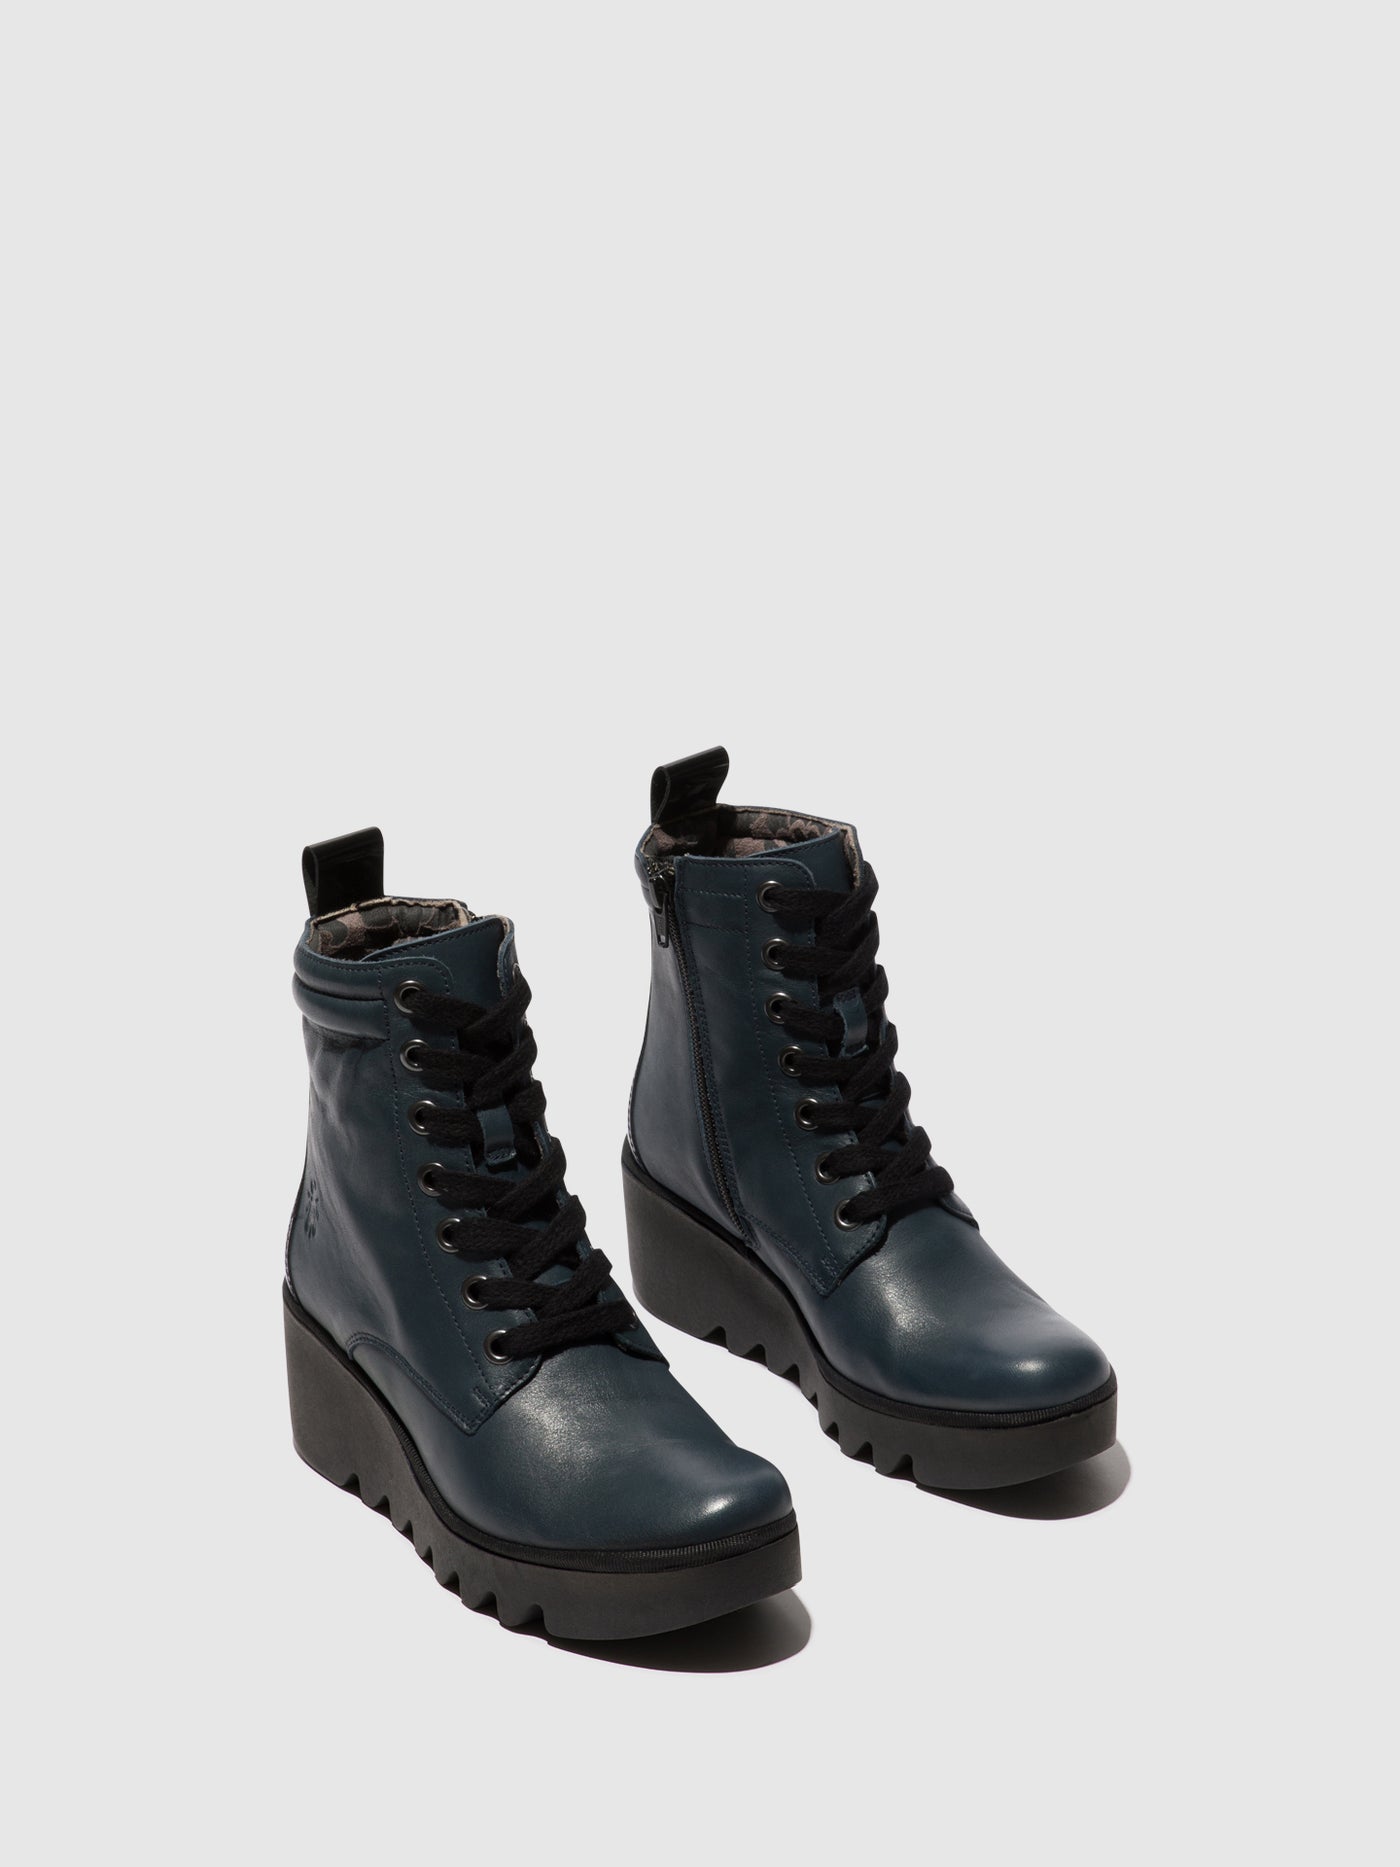 Lace-up Ankle Boots BIAZ329FLY NAVY/BLACK